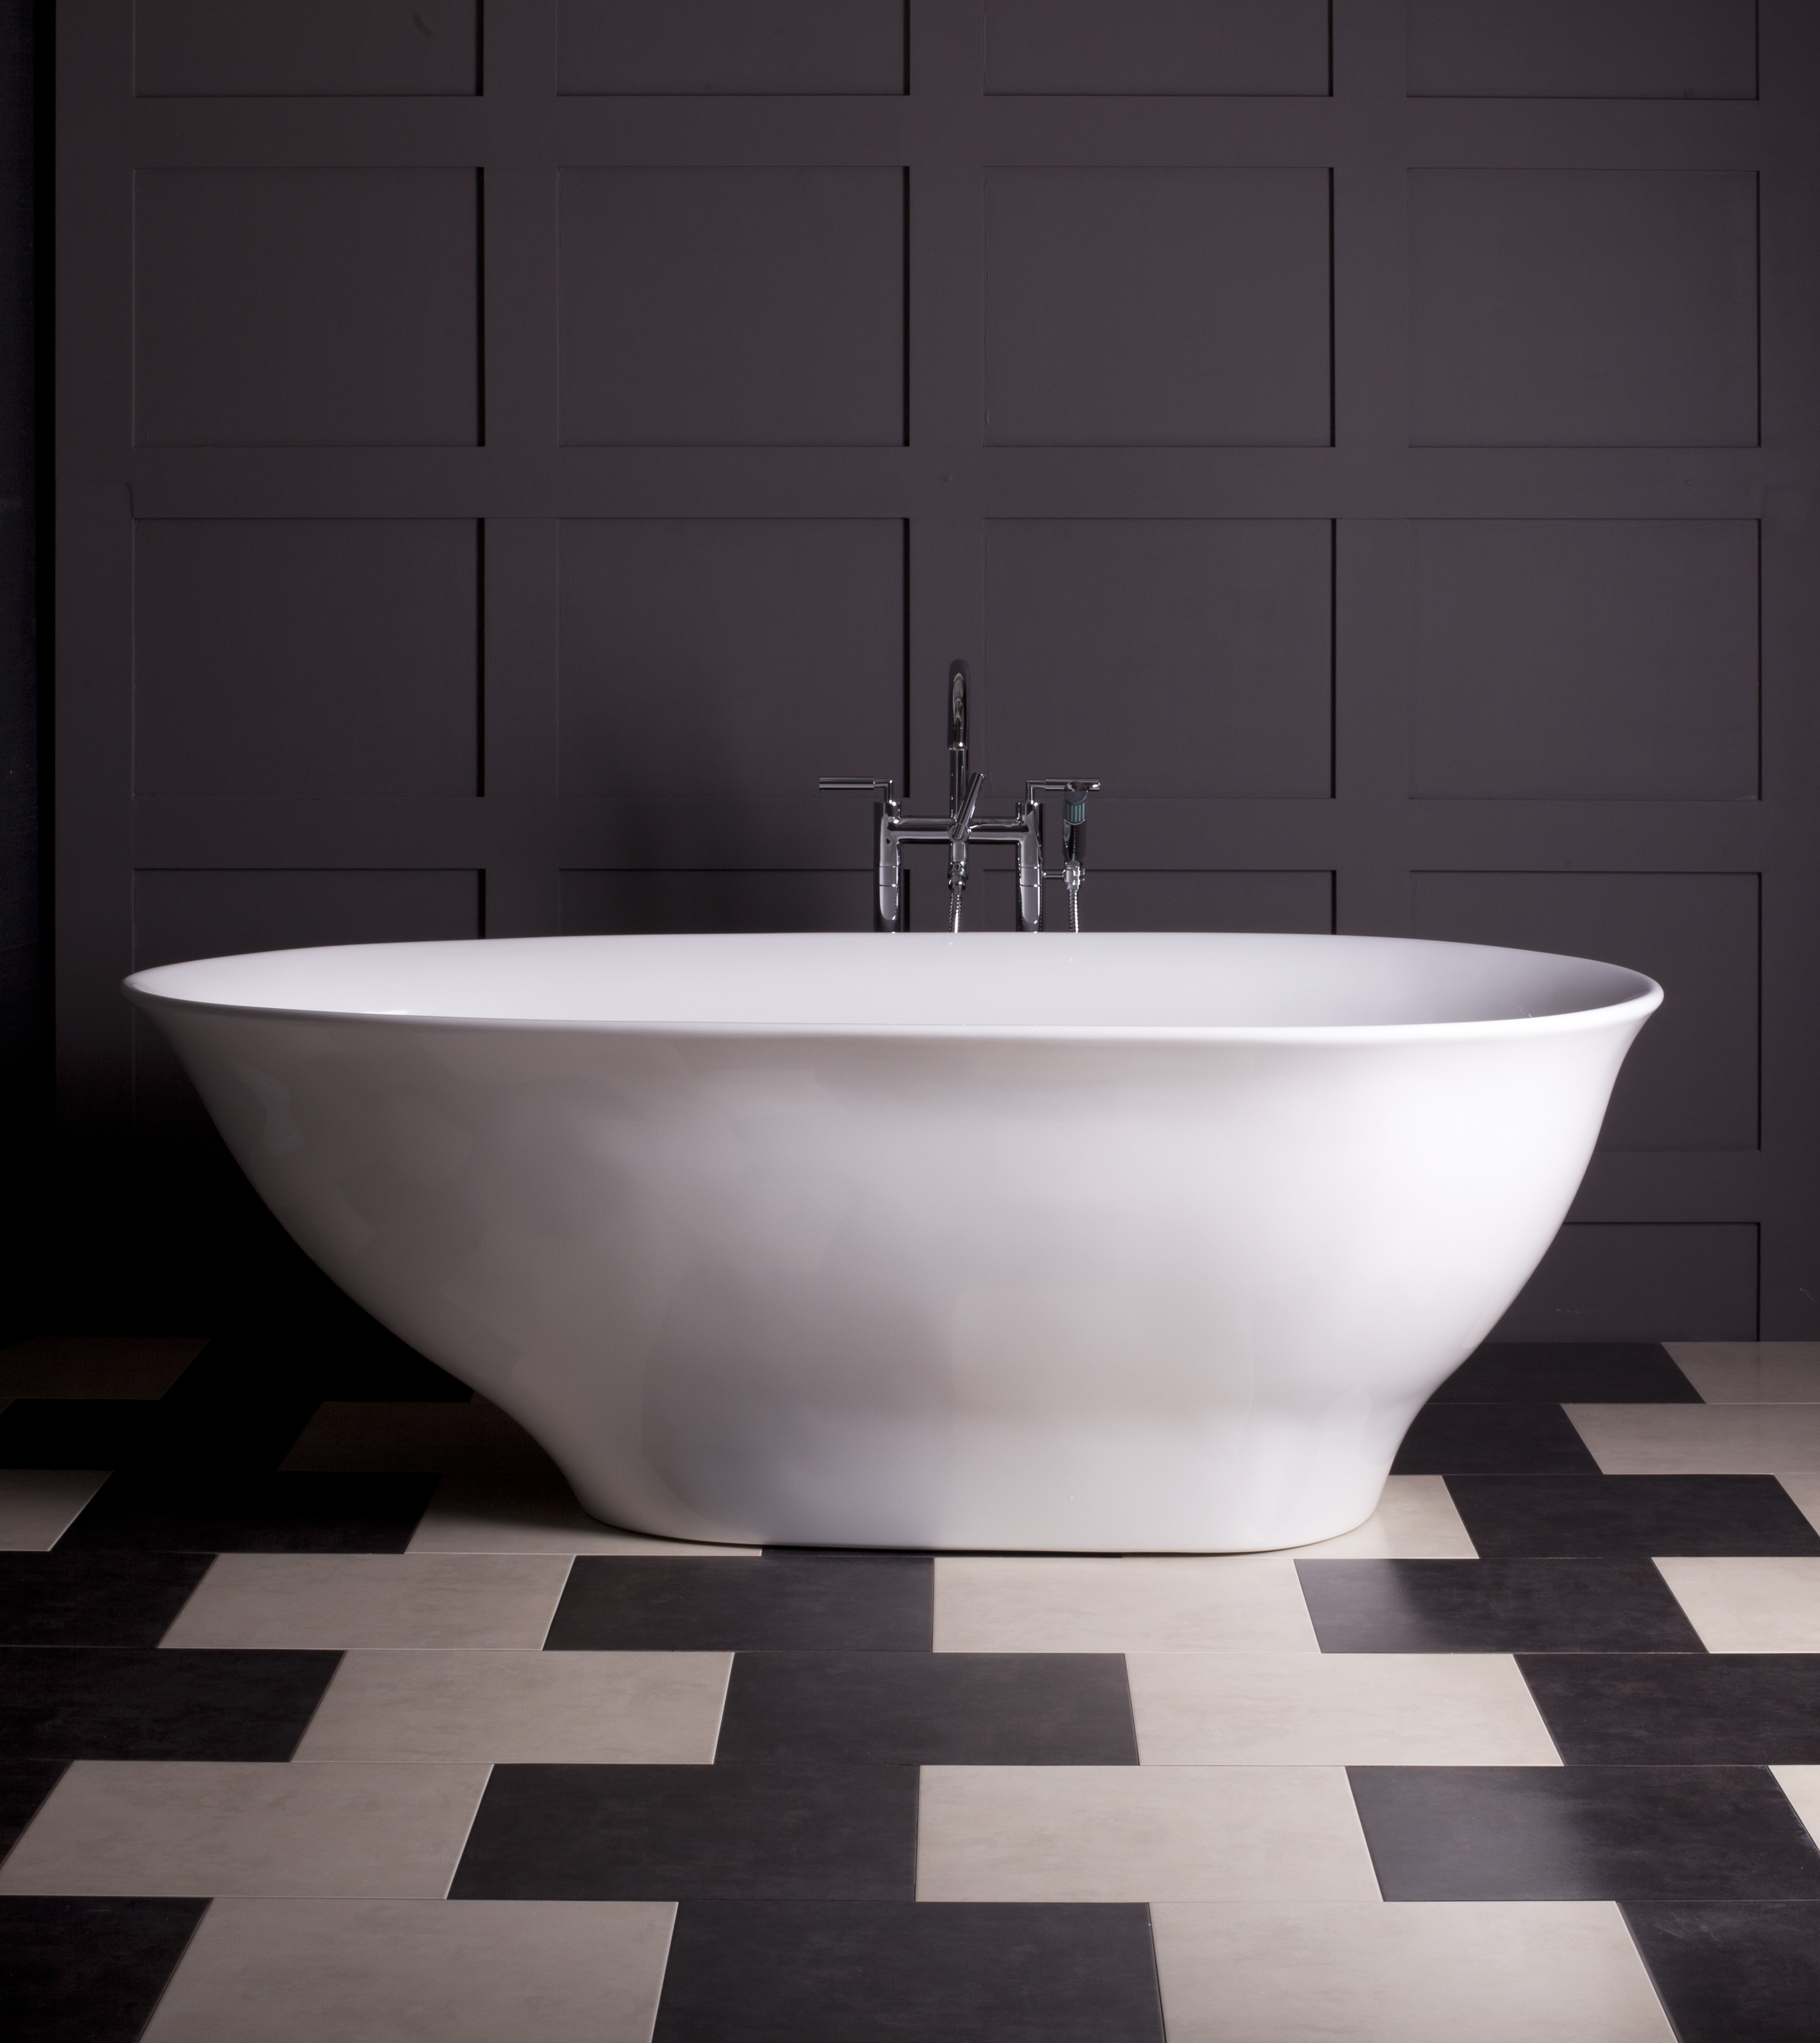 bathroom-inspiration-unique-white-porcelain-soaking-freestanding-bathtub-over-black-and-white-ceramic-floors-and-wooden-wall-panels-as-inspiring-vintage-bathroom-decors-admirable-vintage-bathroo